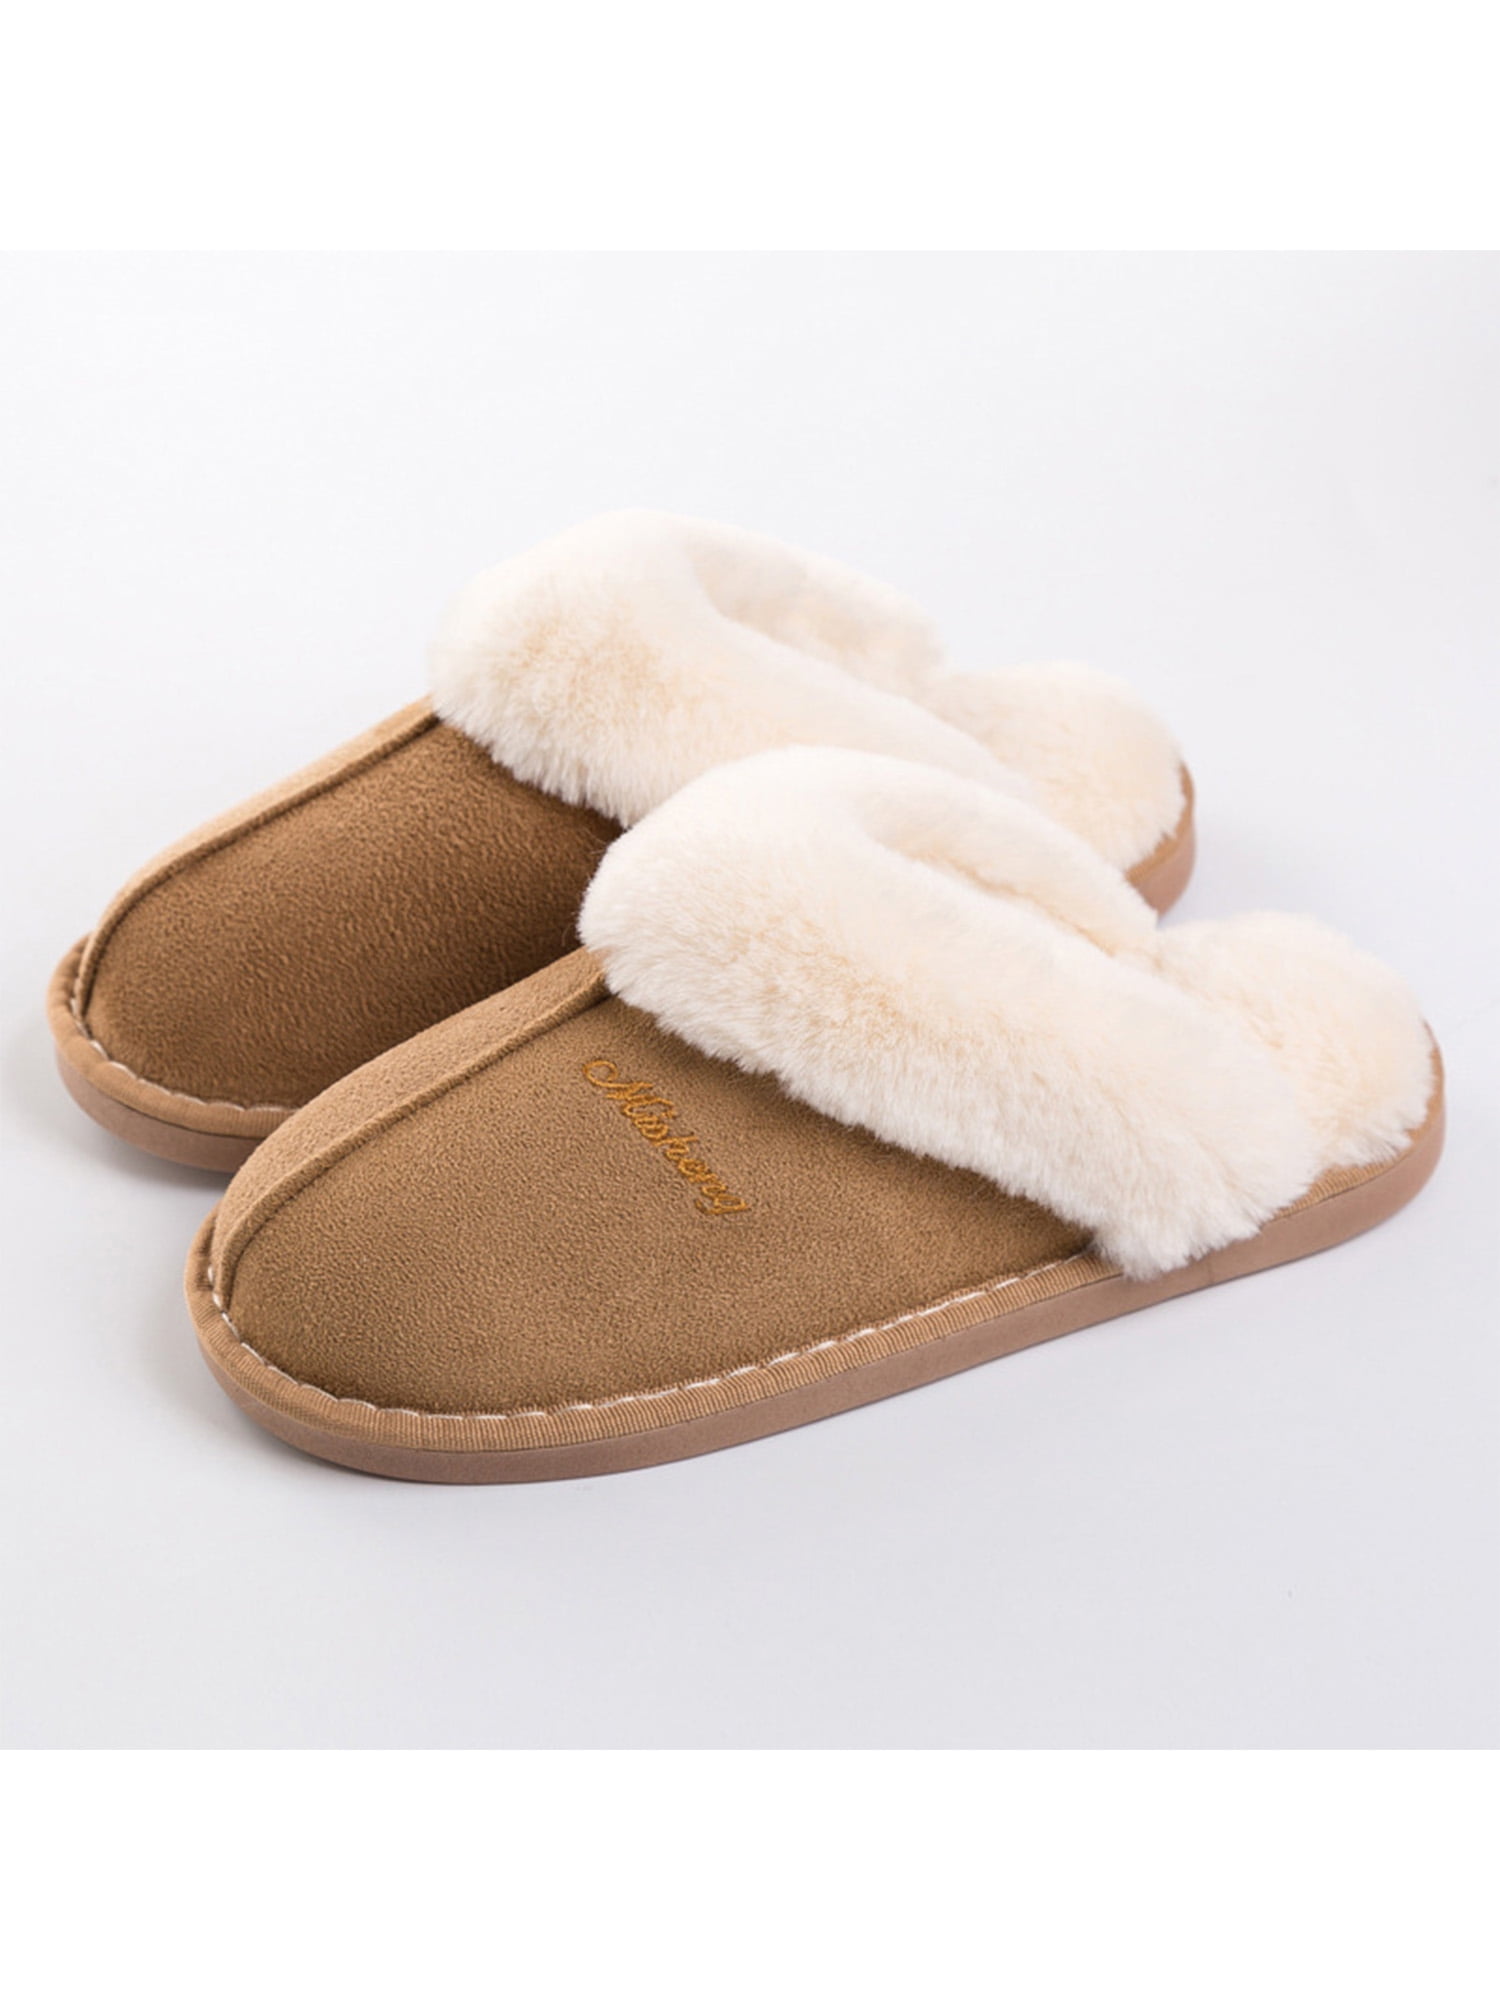 Women Plush Slippers Winter Indoor Home Open Toe Slippers Soft Slippers  Ladies Warm Slippers Esg14282 - China Slippers and Women Slippers price |  Made-in-China.com